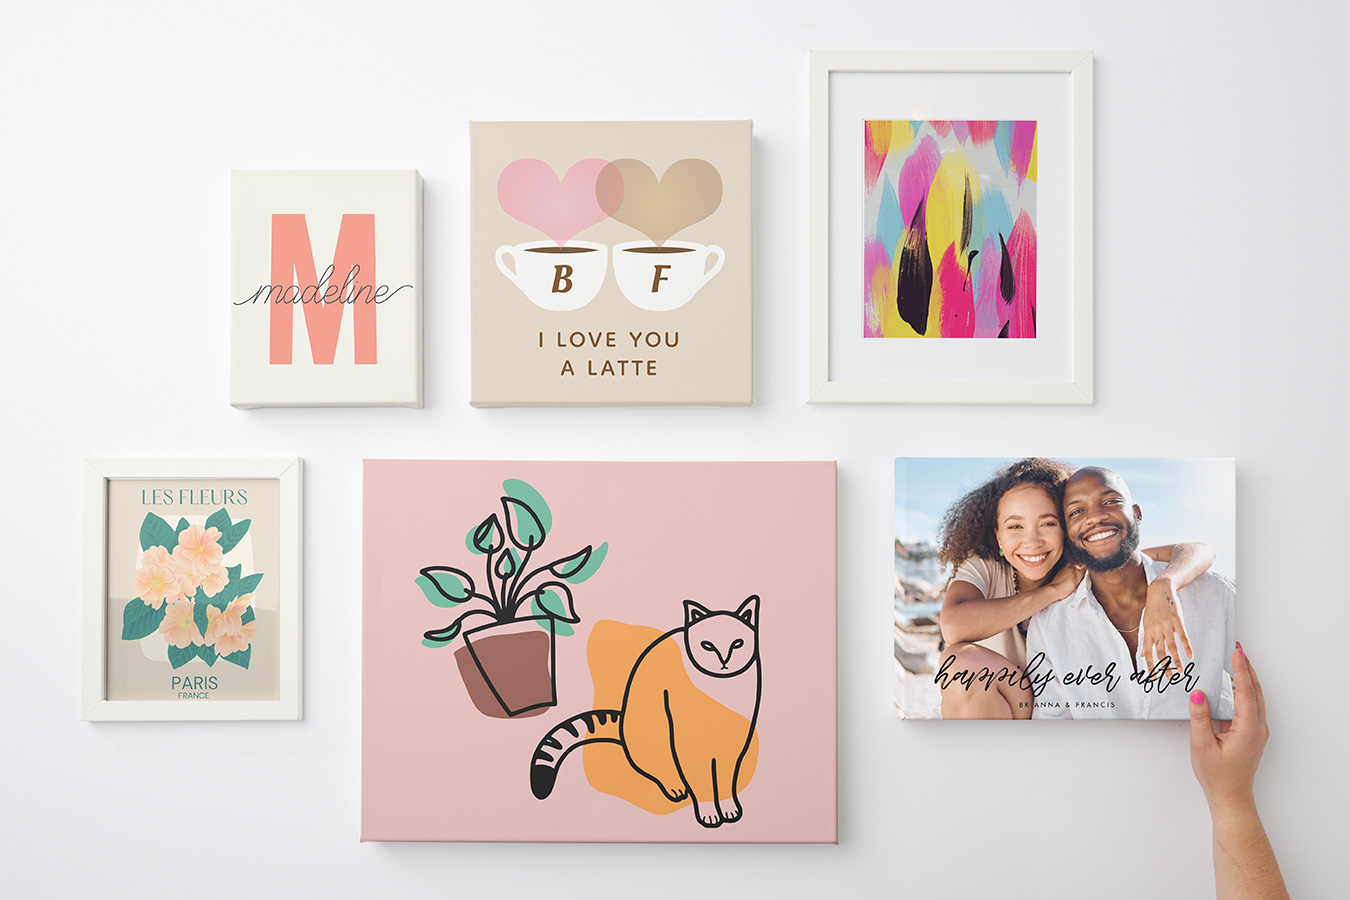 How to hang posters without damaging walls: 6 damage-free ways - Custom  Stickers - Make Custom Stickers Your Way